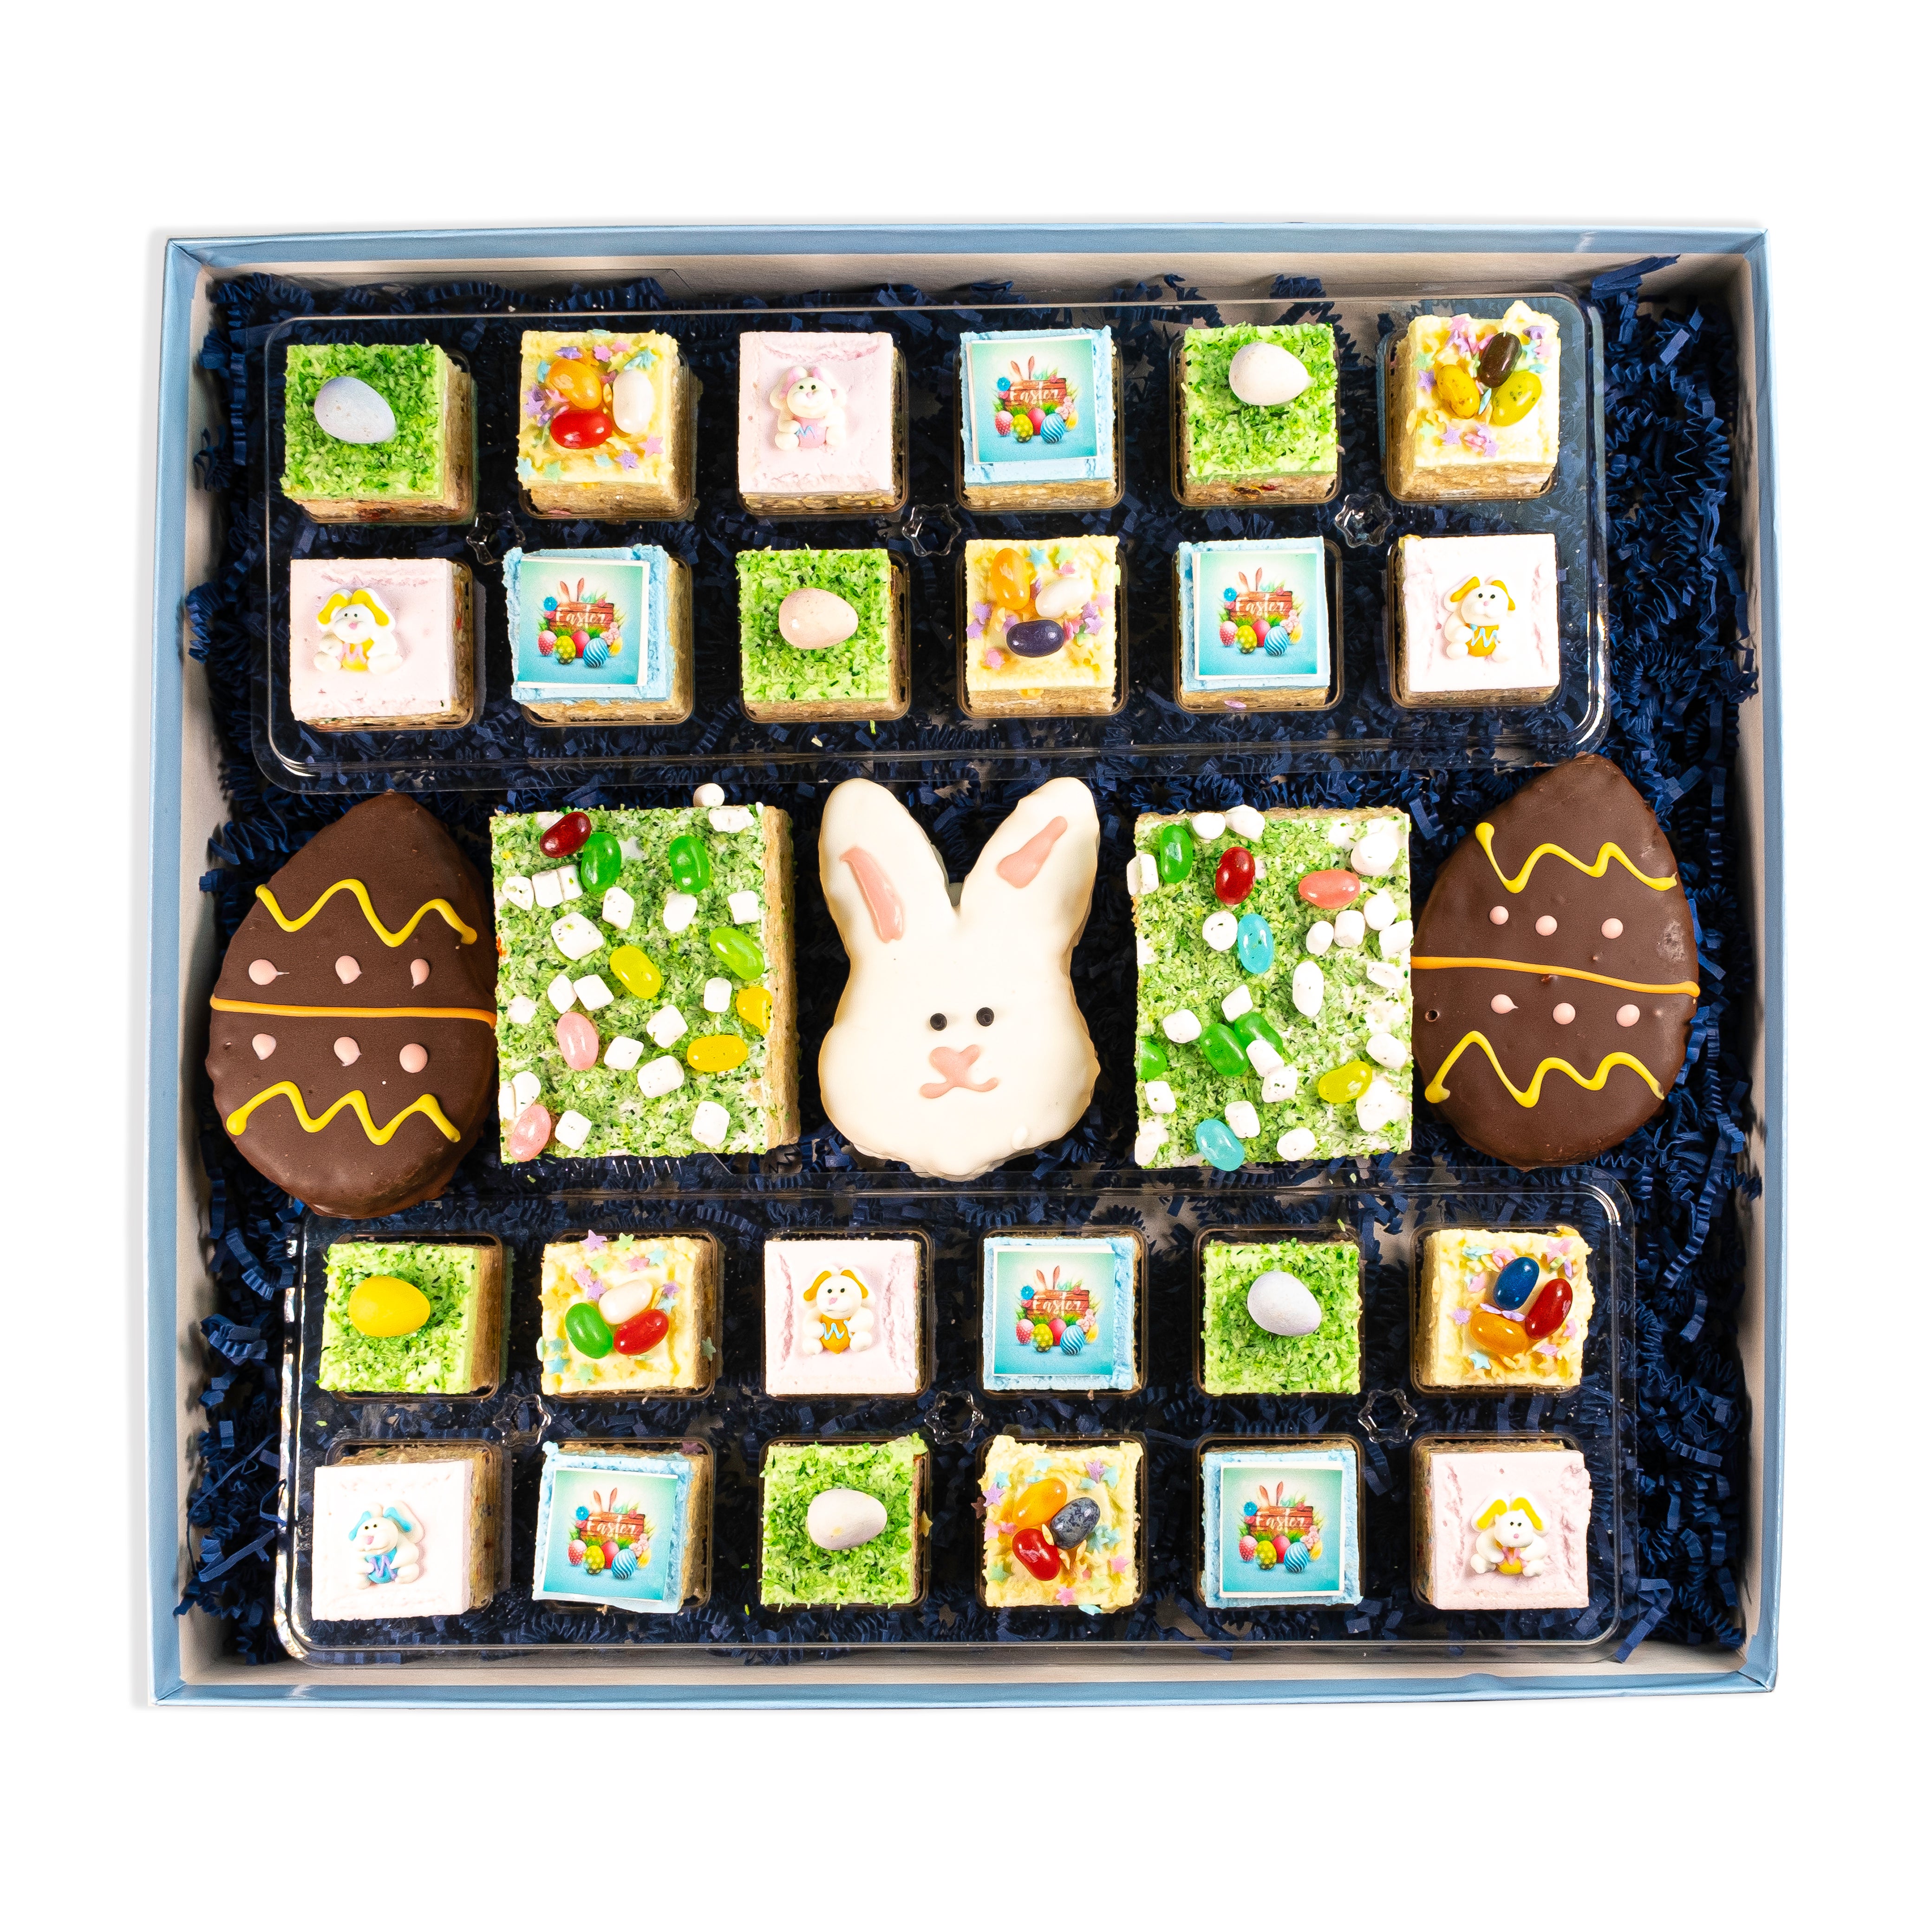 Deluxe Easter Gift Box